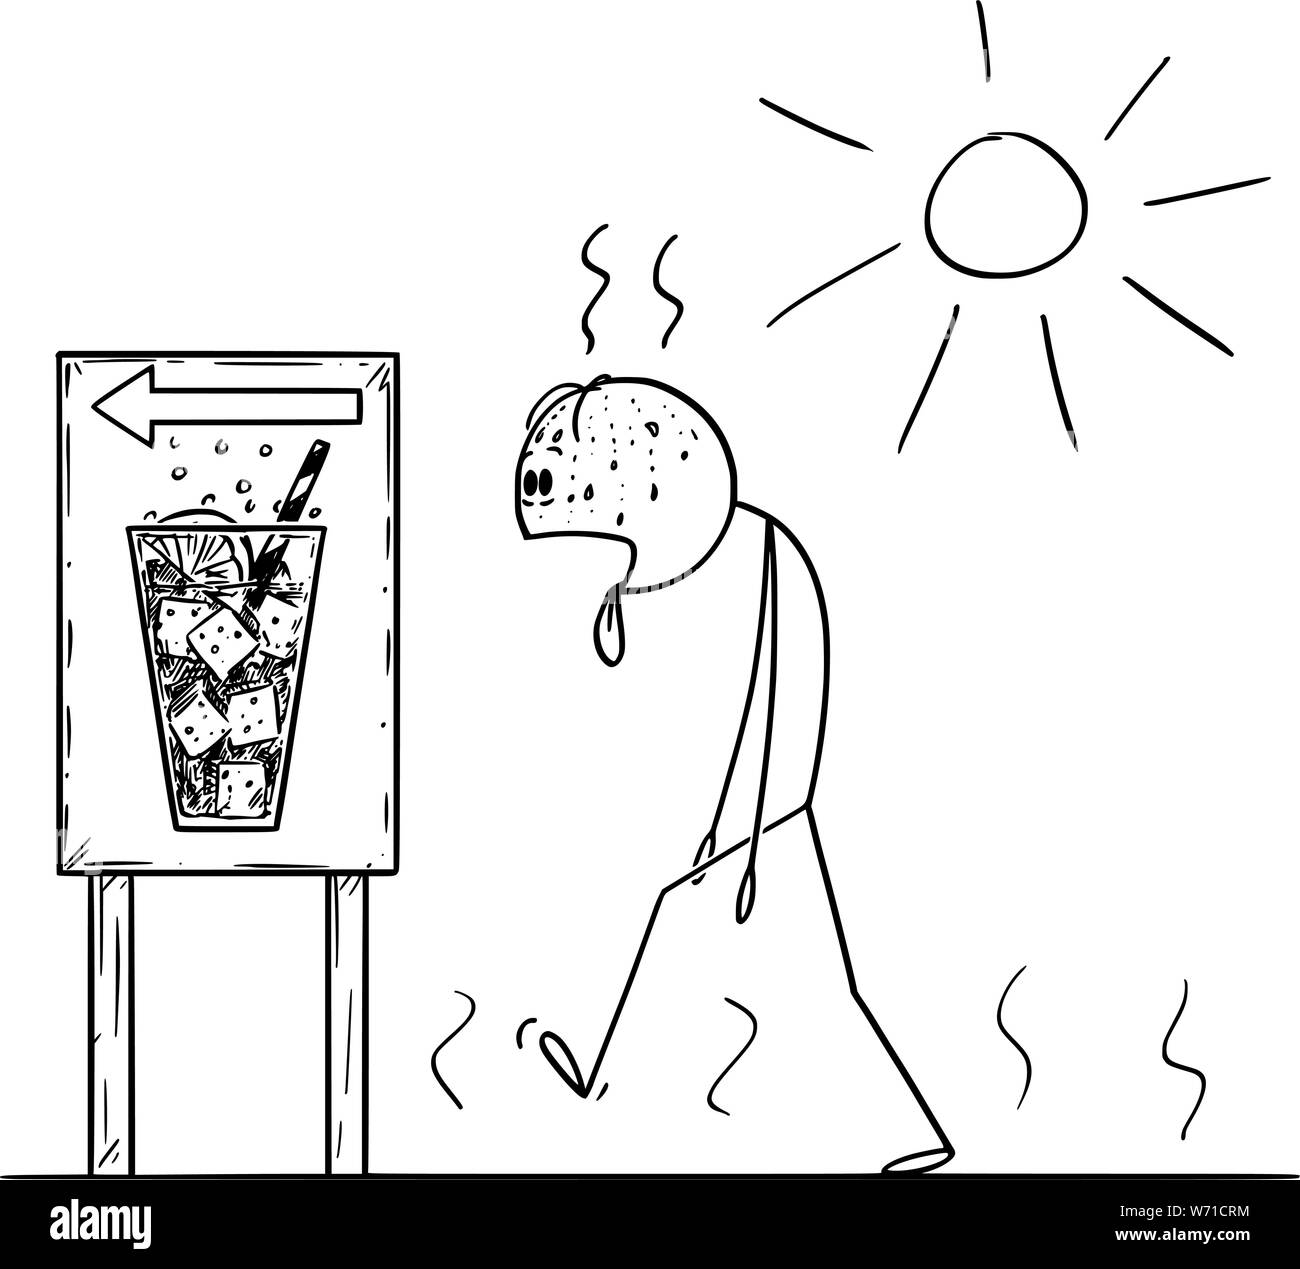 Vector cartoon stick figure drawing conceptual illustration of exhausted man walking in sunny day in summer to buy cold drink or soda with tongue lolling out. Stock Vector